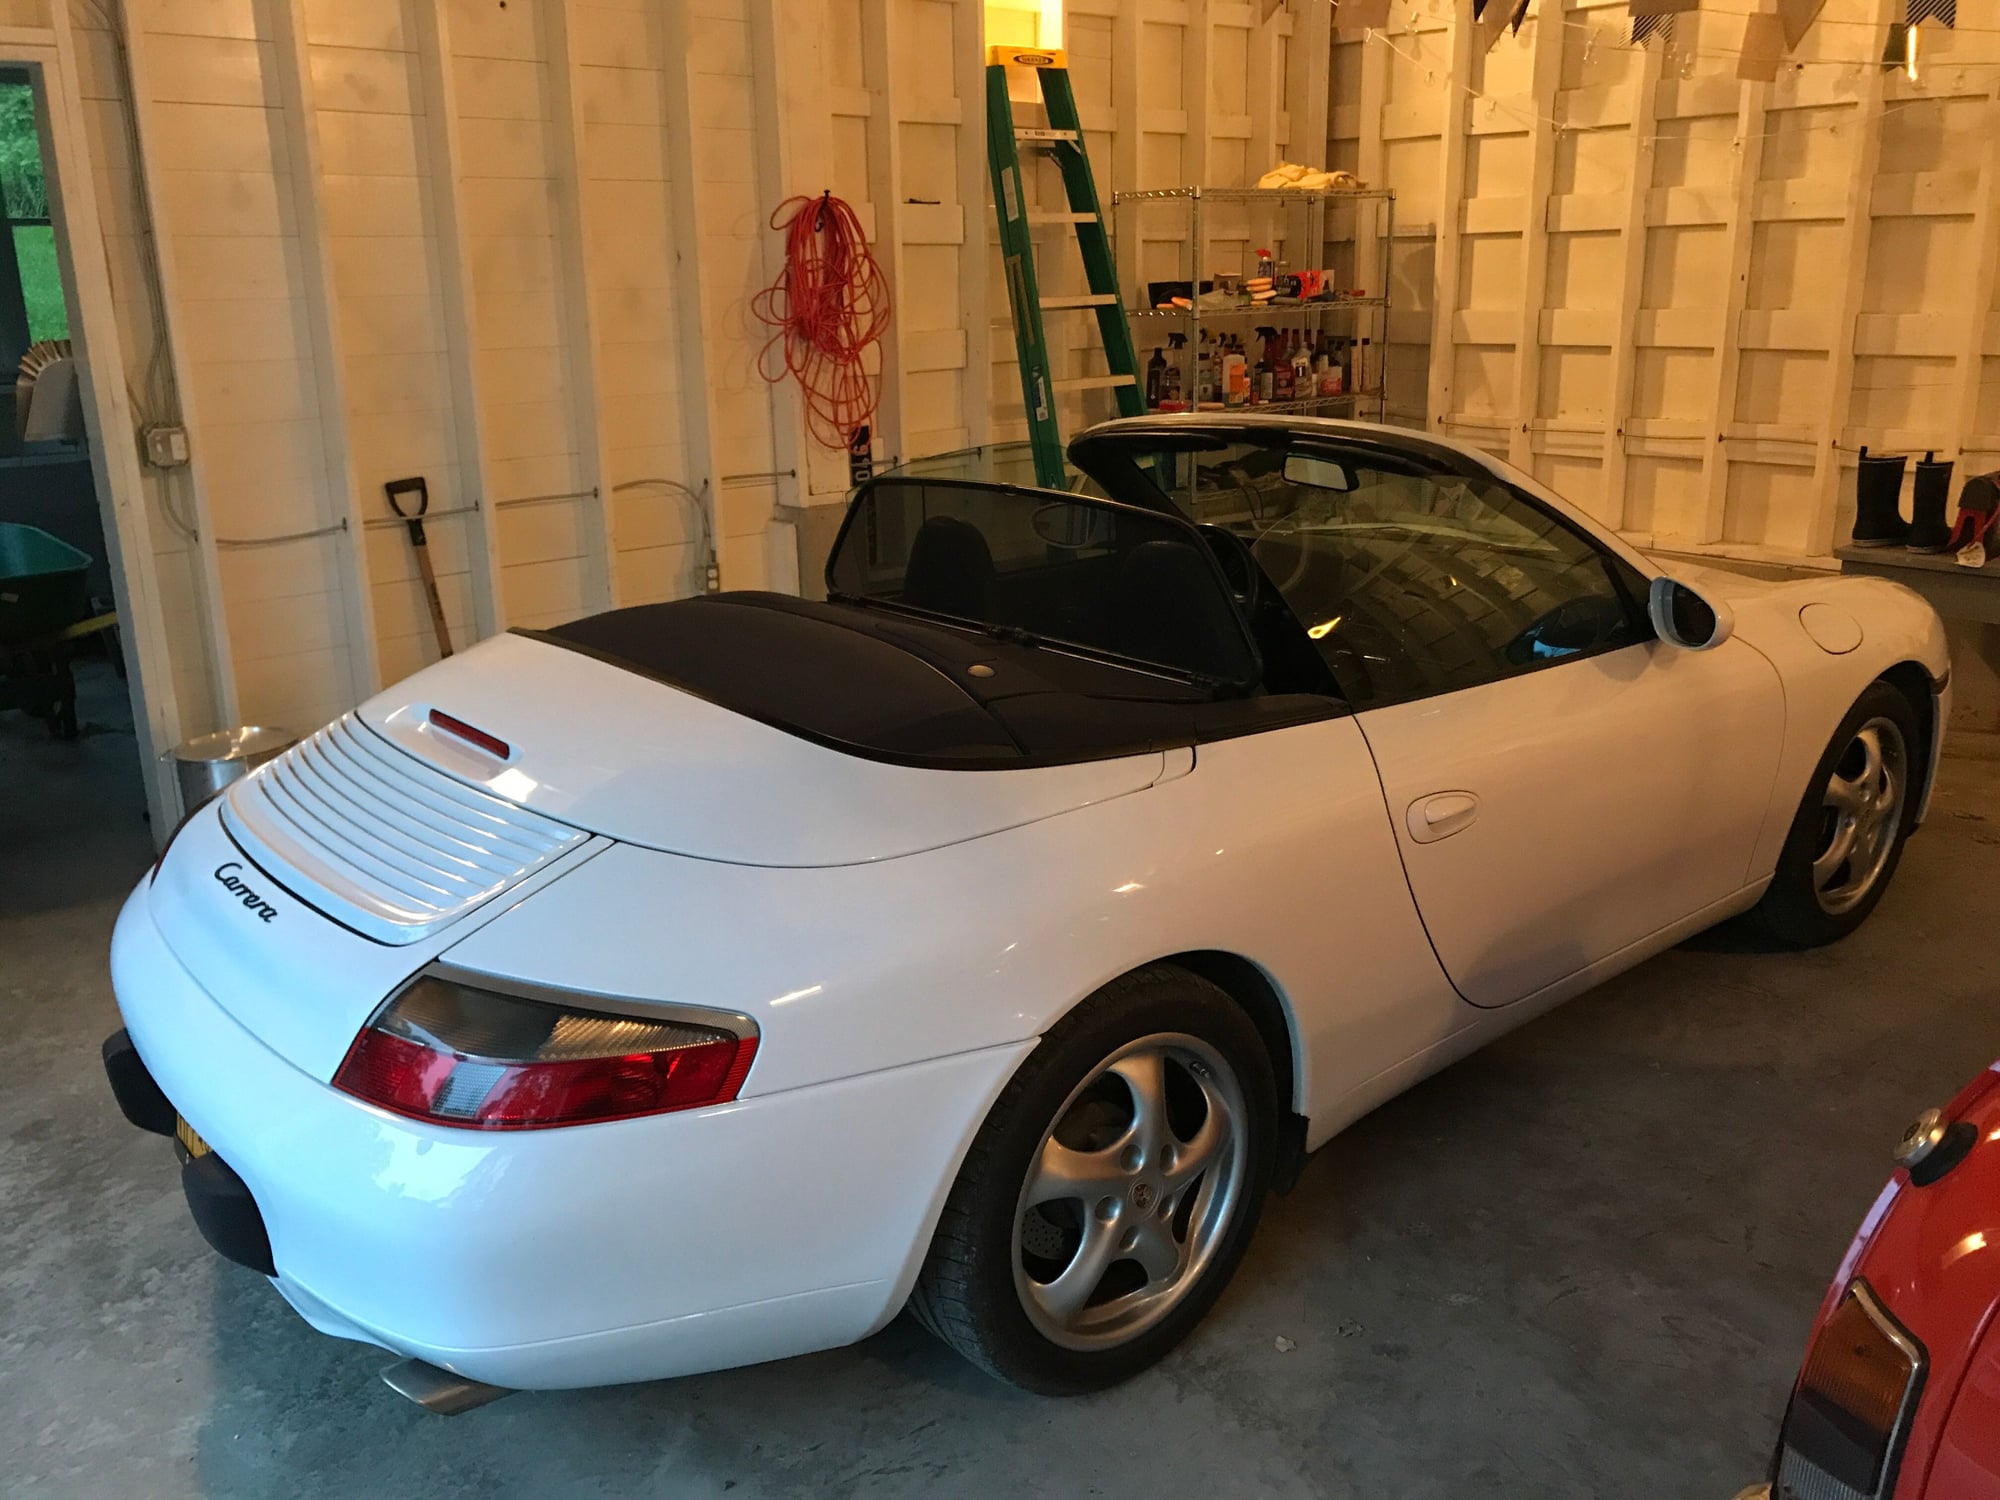 1999 - 2004 Porsche 911 - Swap my MT 996 for a Tip 996 Coupe/Targa? - Used - 60,000 Miles - 6 cyl - 2WD - Manual - Convertible - White - New Paltz, NY 12561, United States